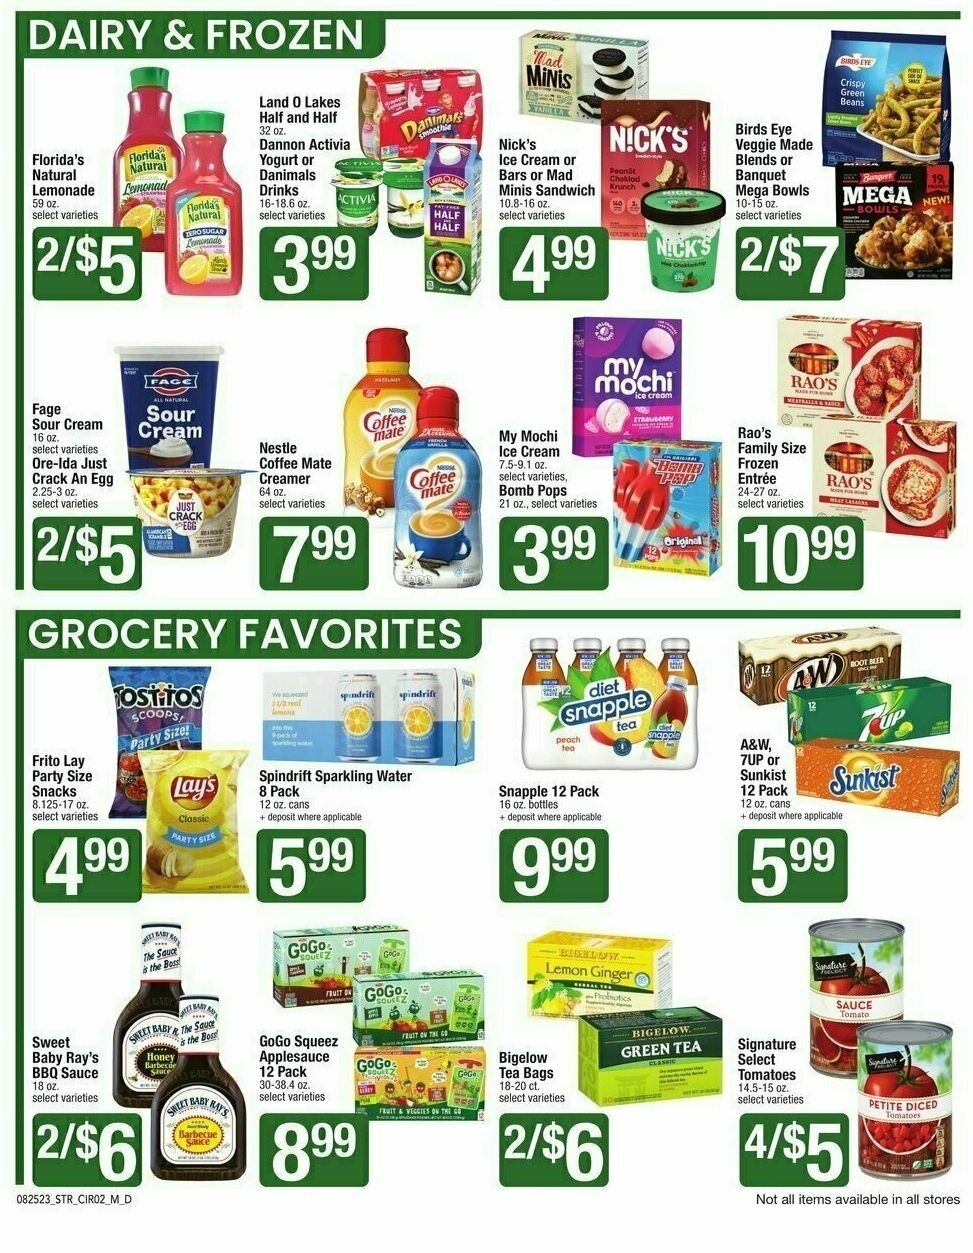 Star Market Weekly Ad from August 25